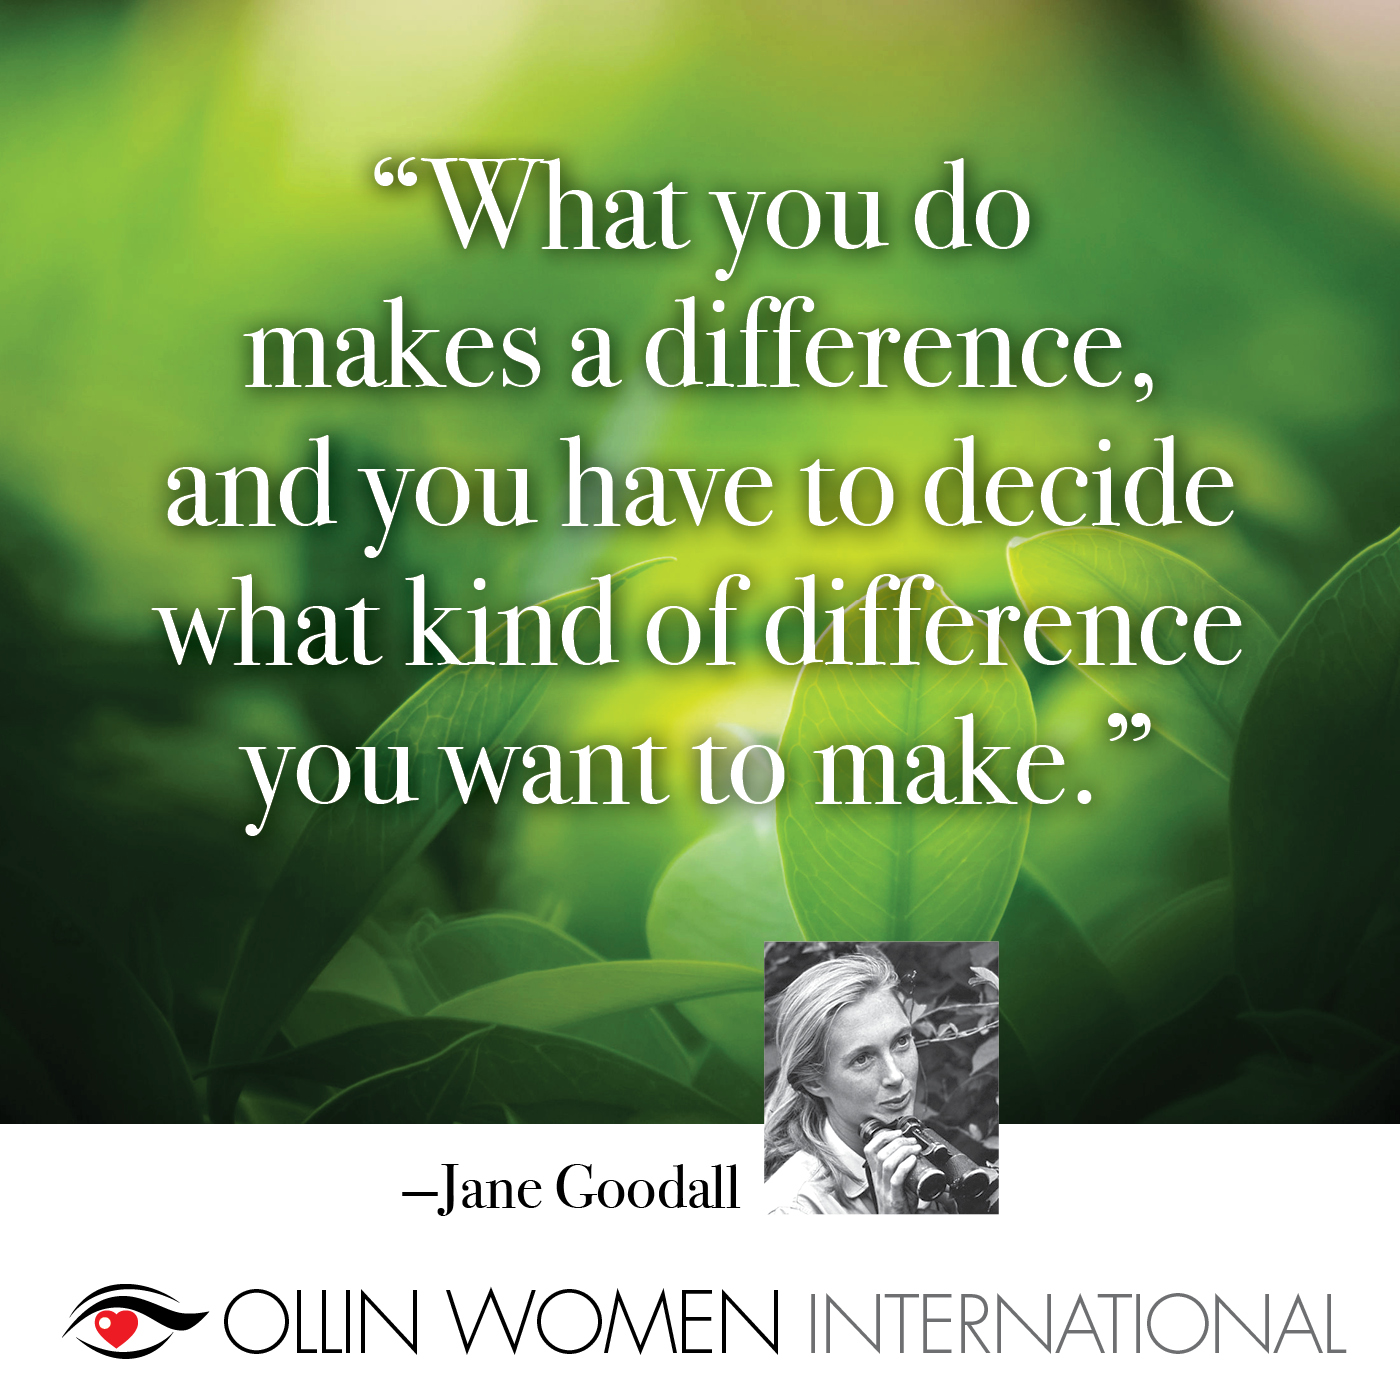 What you do makes a difference, and you have to decide what kind of difference do you want to make.